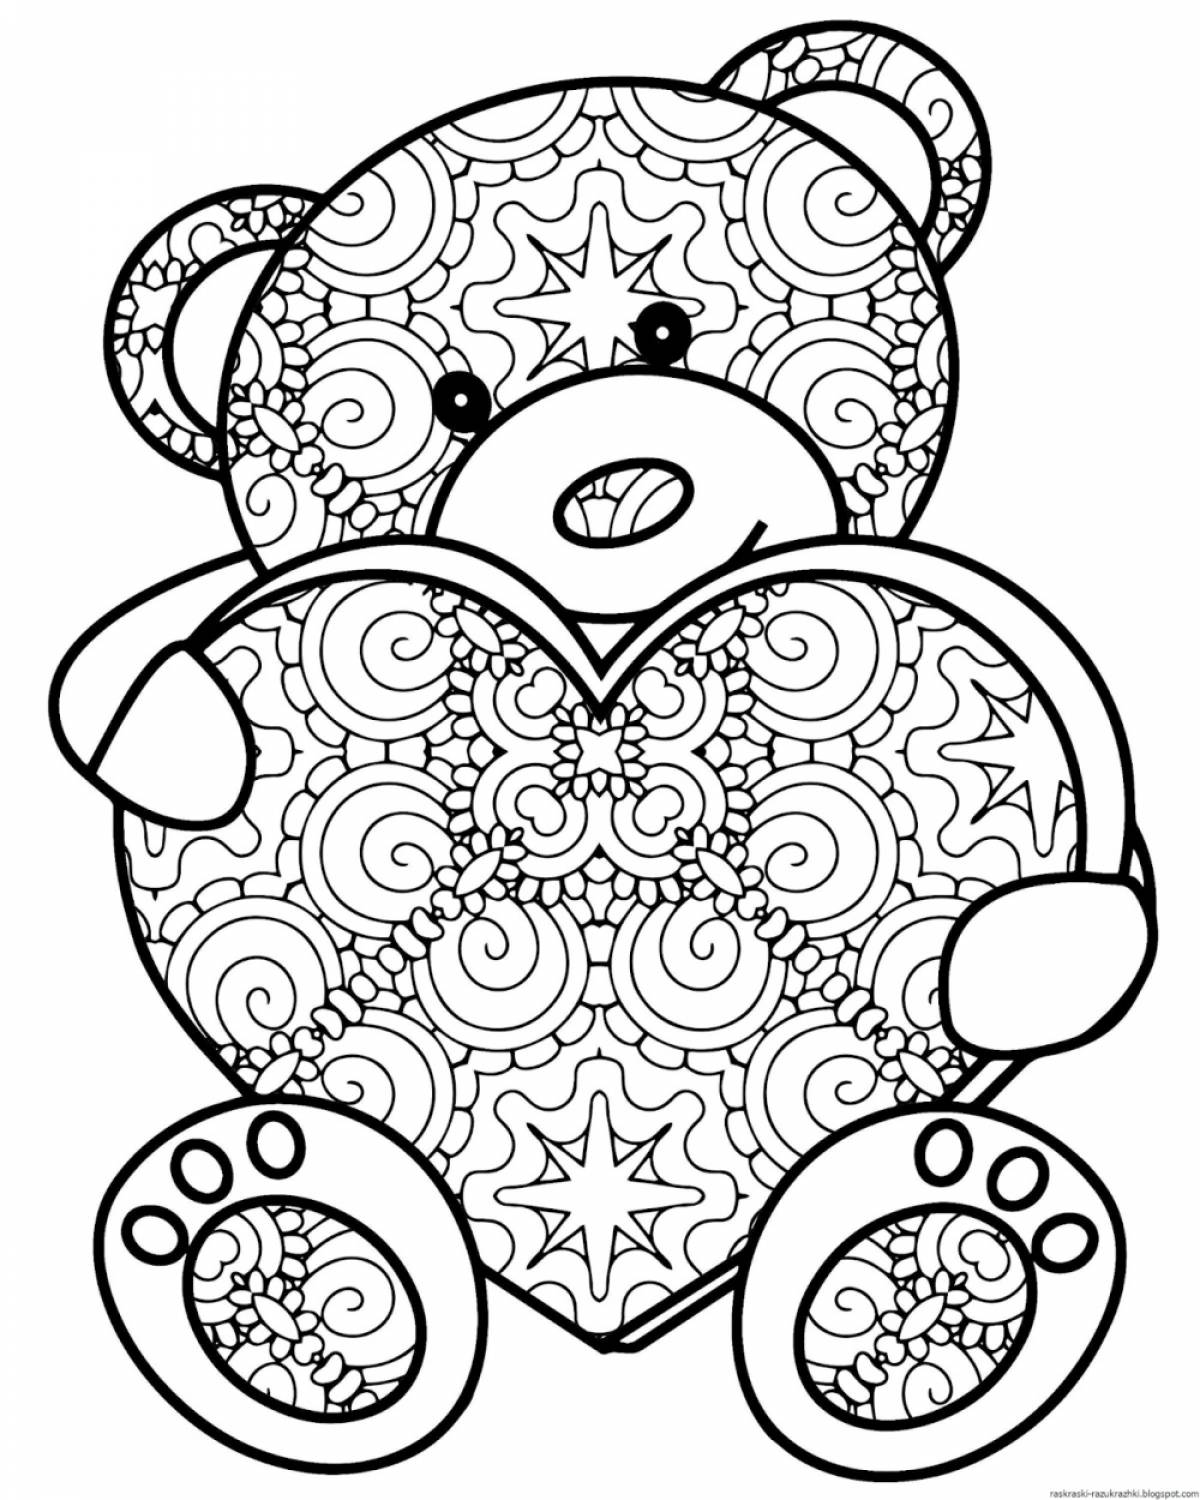 Coloring page new for 2020: grandiose and shiny